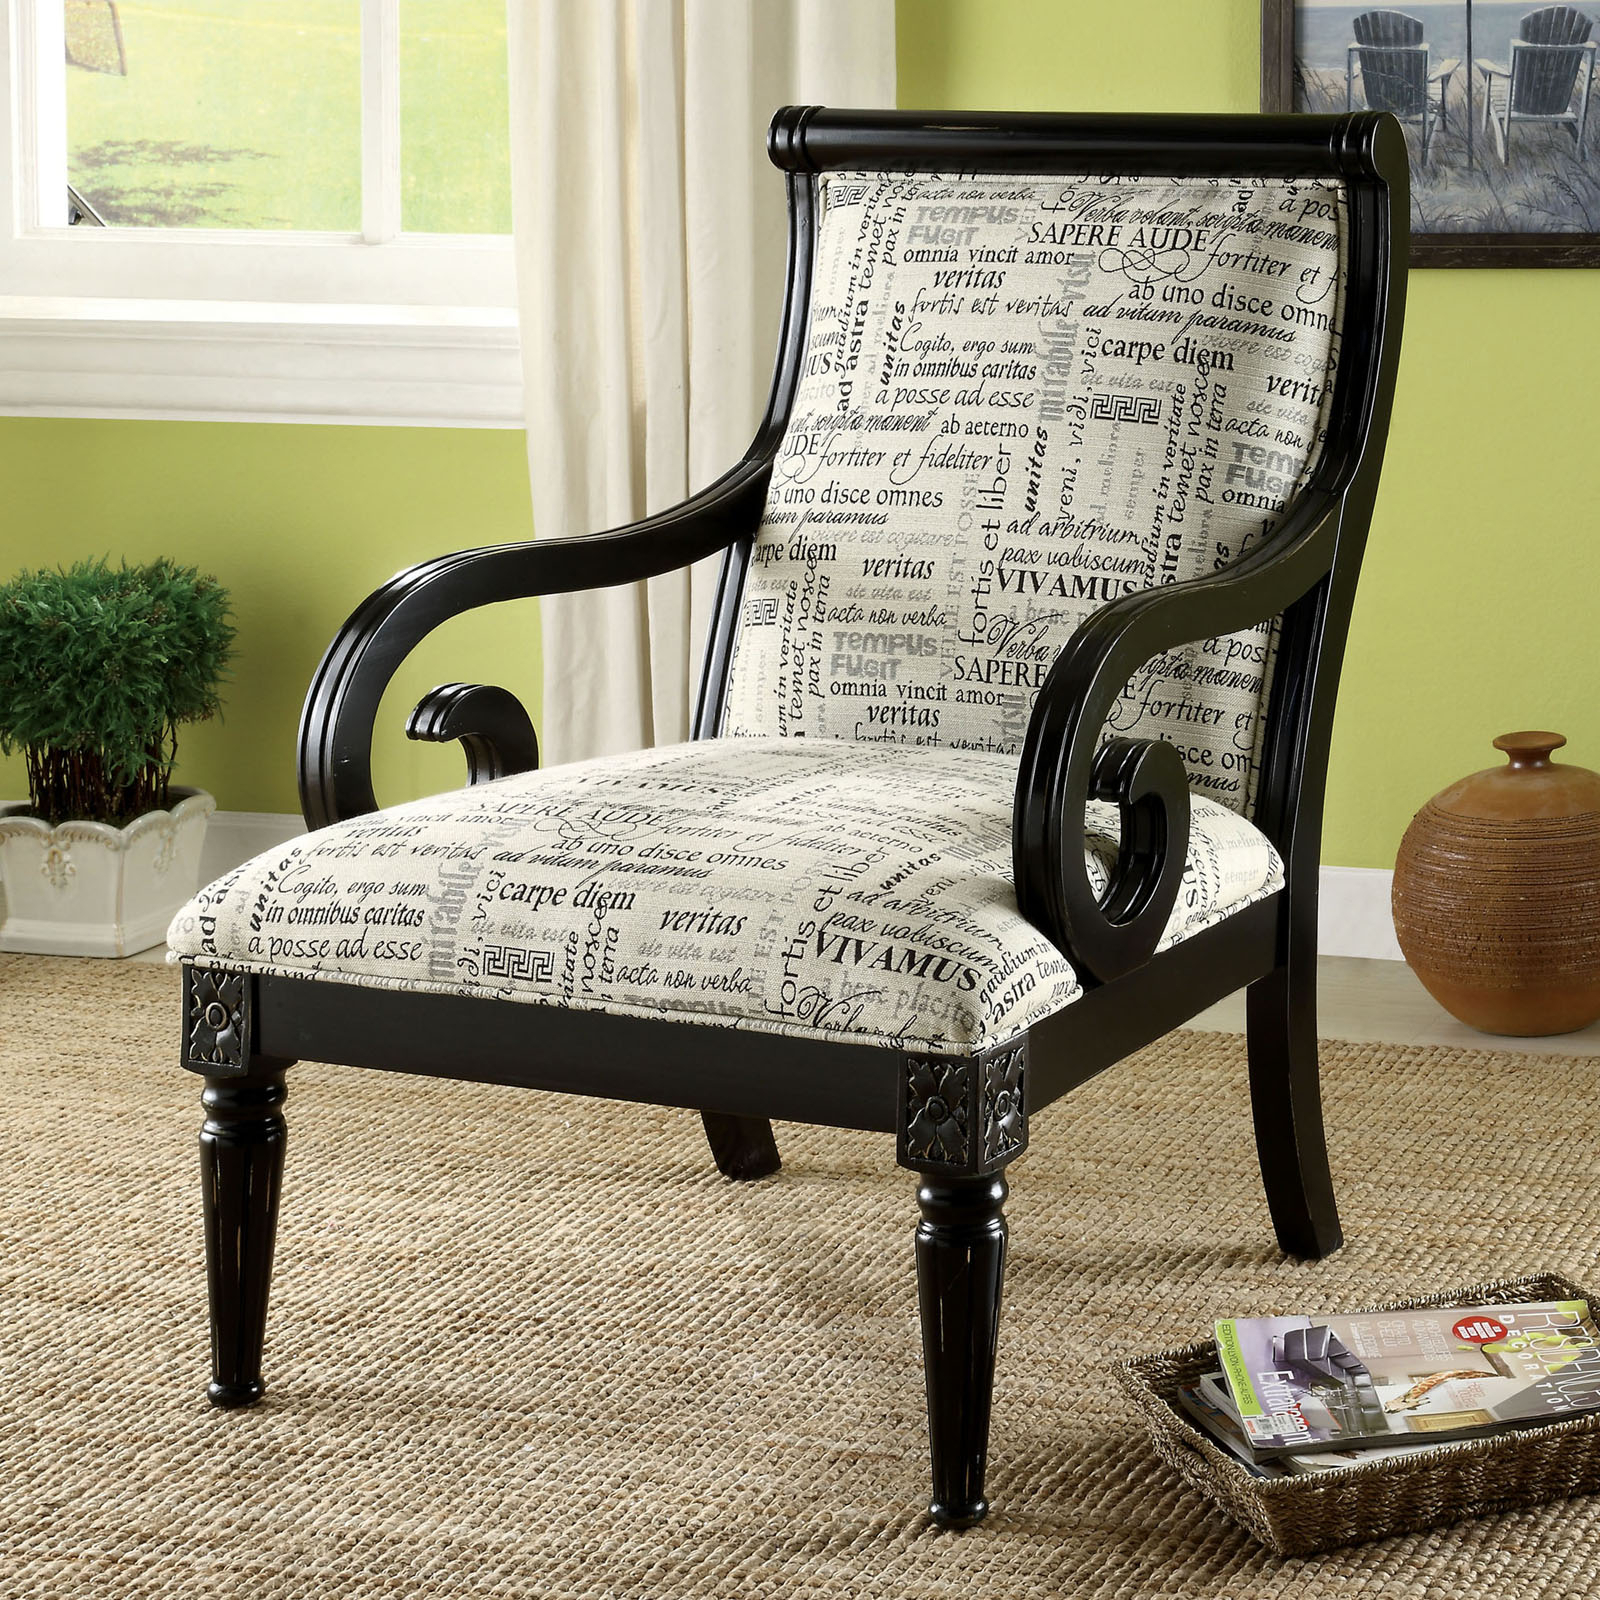 Wood Antique Arm Chairs Ideas on Foter